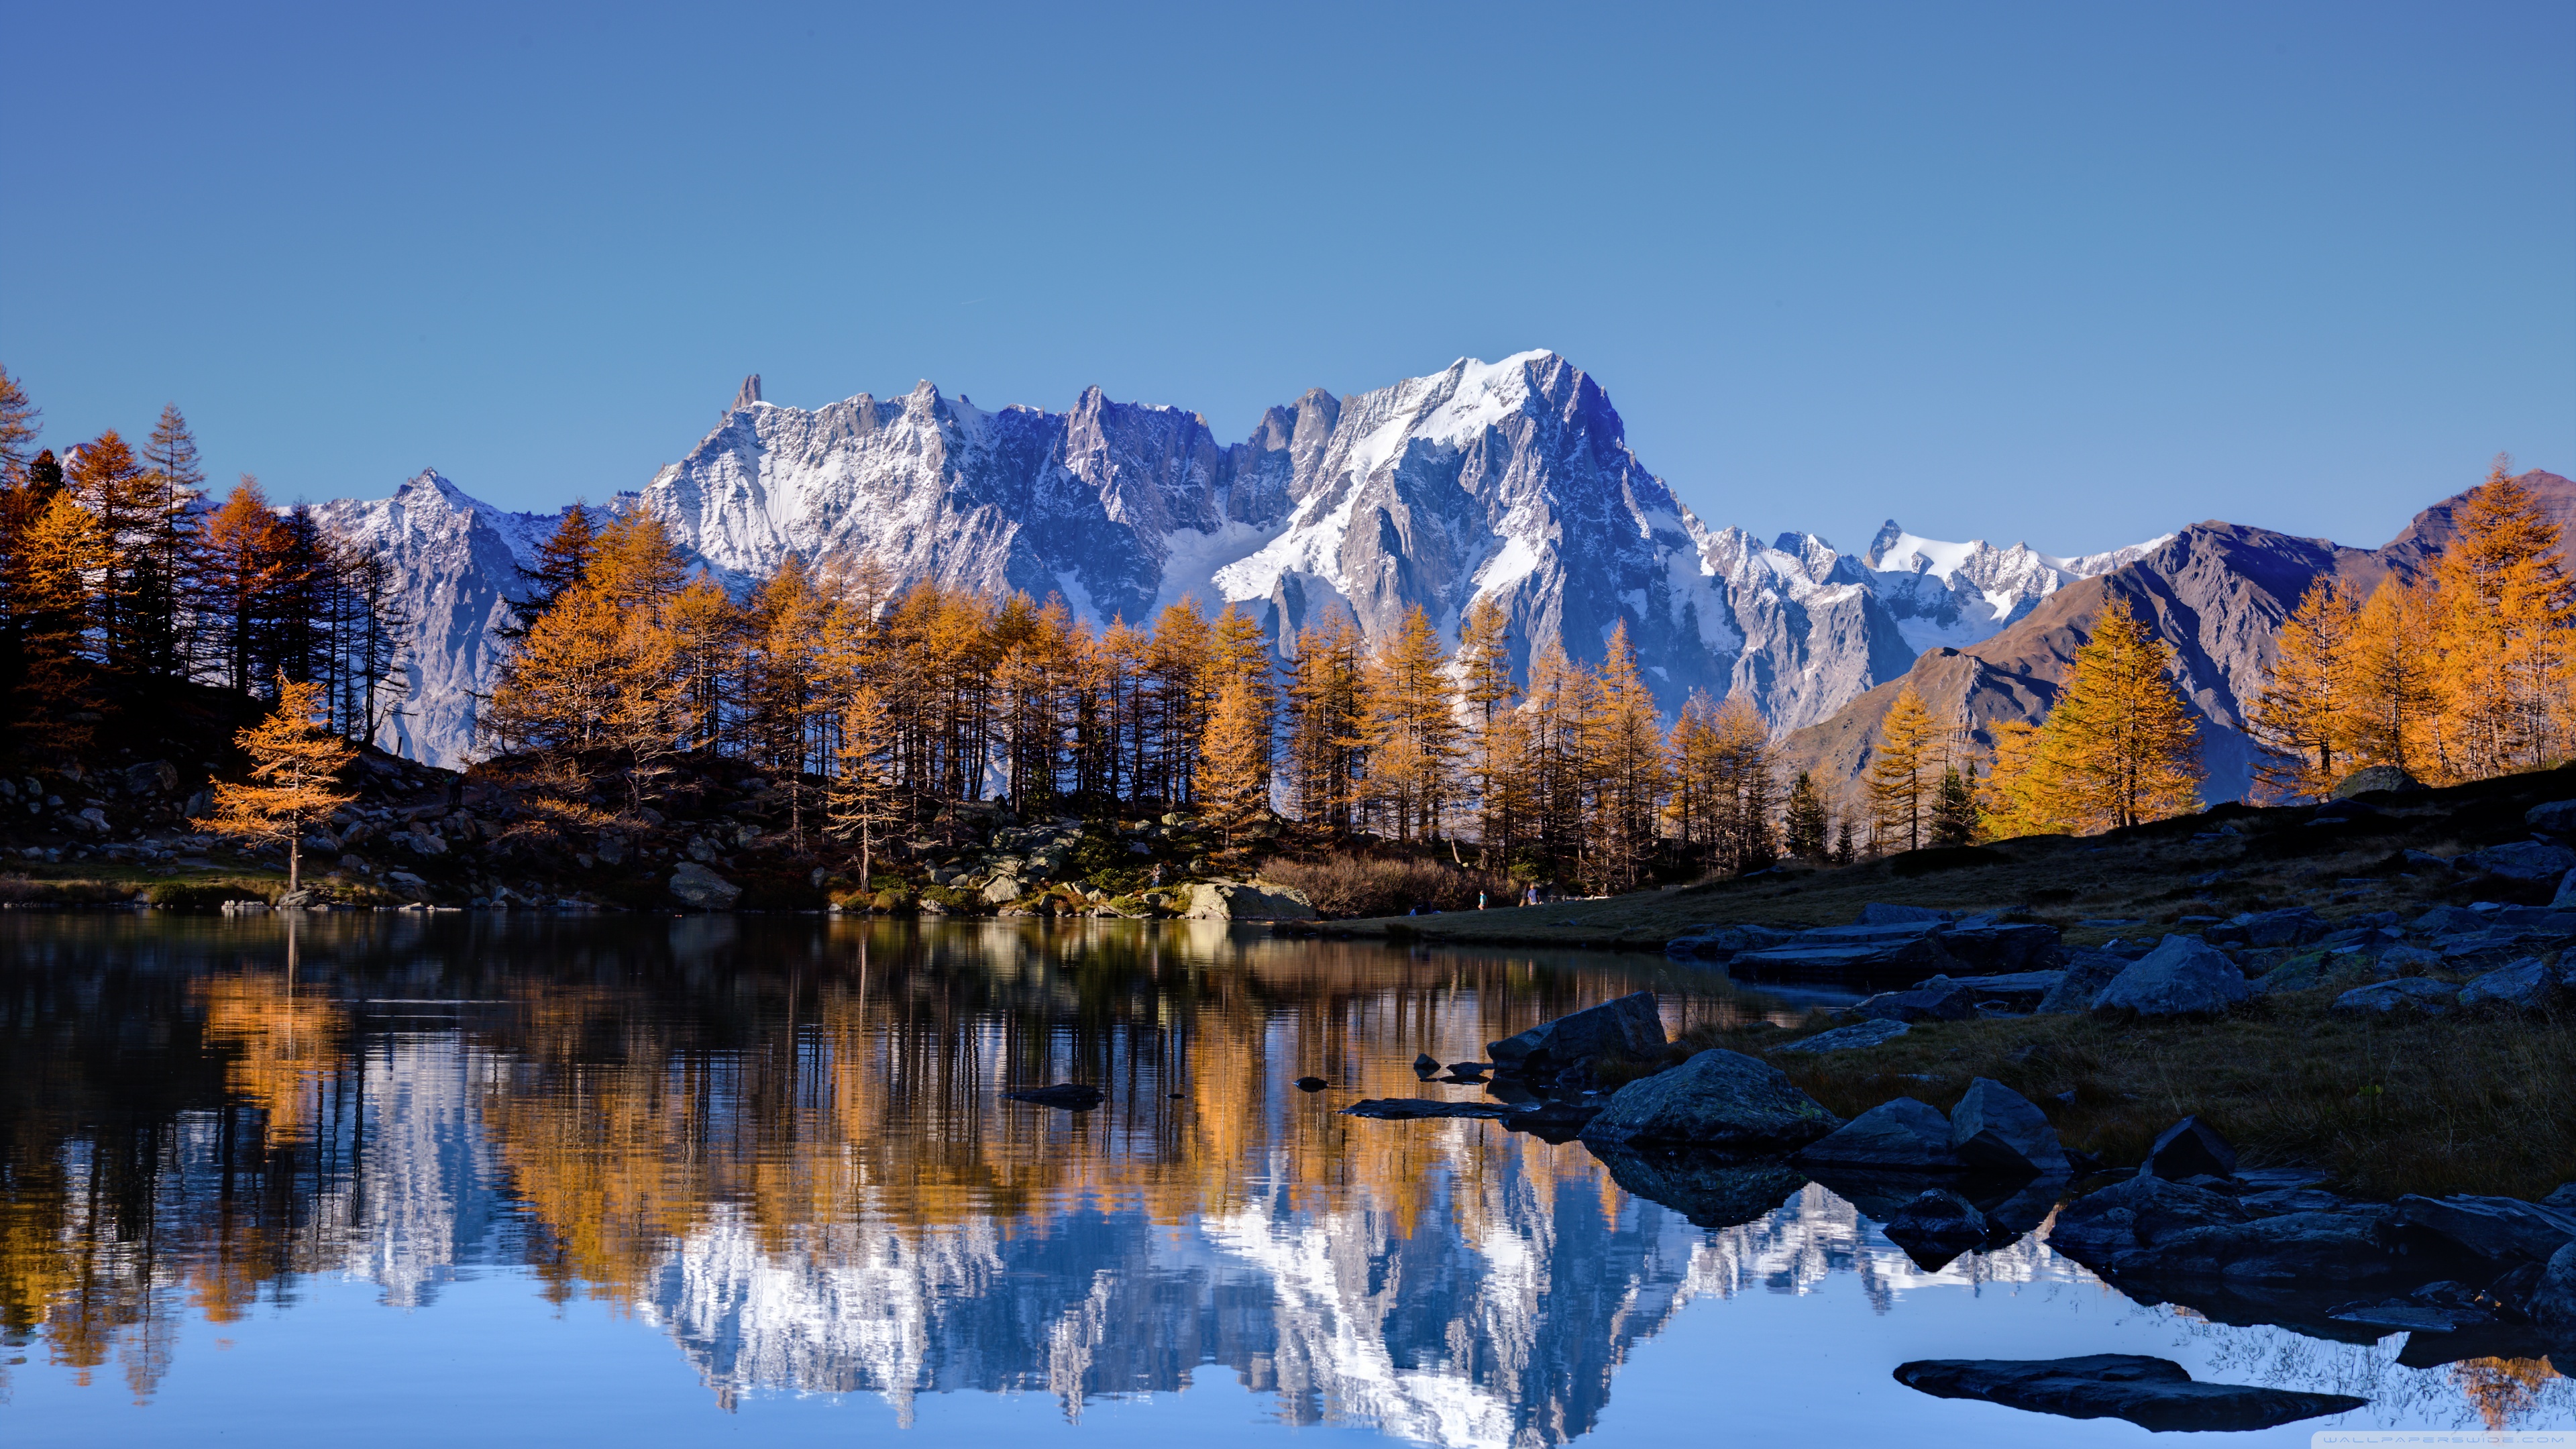 Mont Blanc Autumn Ultra HD Desktop Background Wallpaper for: Multi Display, Dual Monitor, Tablet